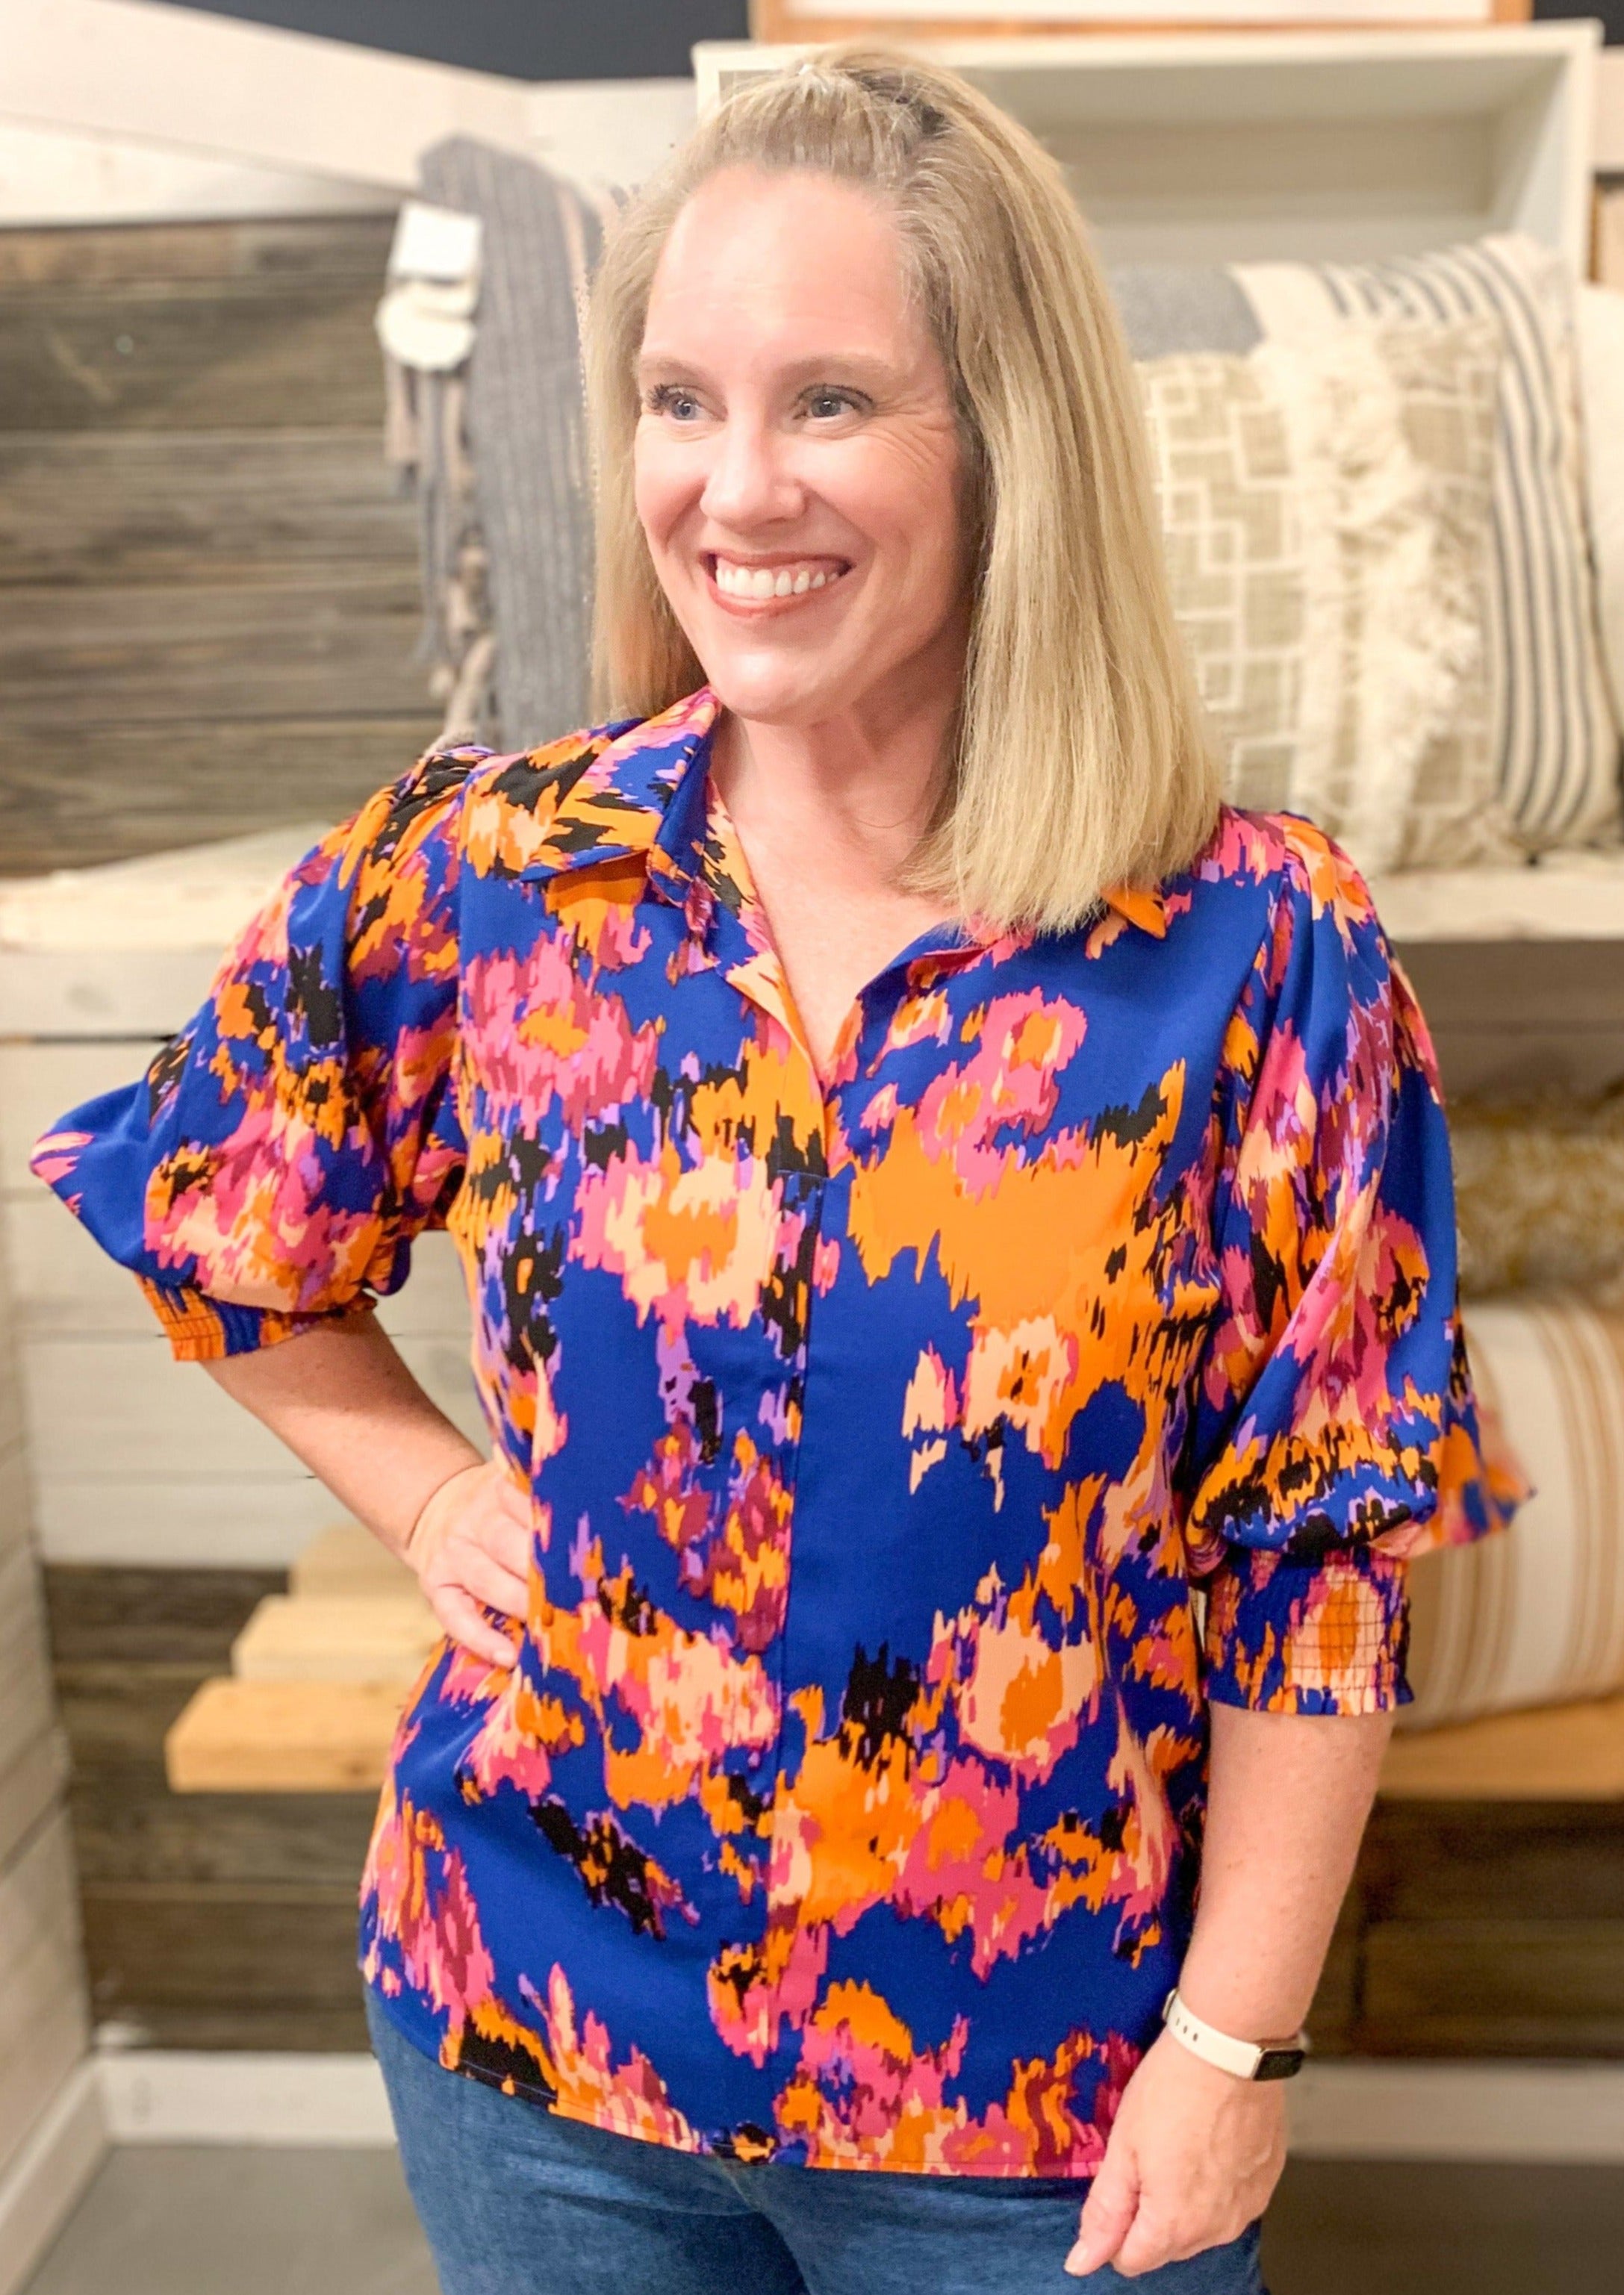 blue pink yellow and orange abstract print satin blouse. Has slight V neck, collar, and a puff sleeve with a wide elastic banded cuff near elbow.